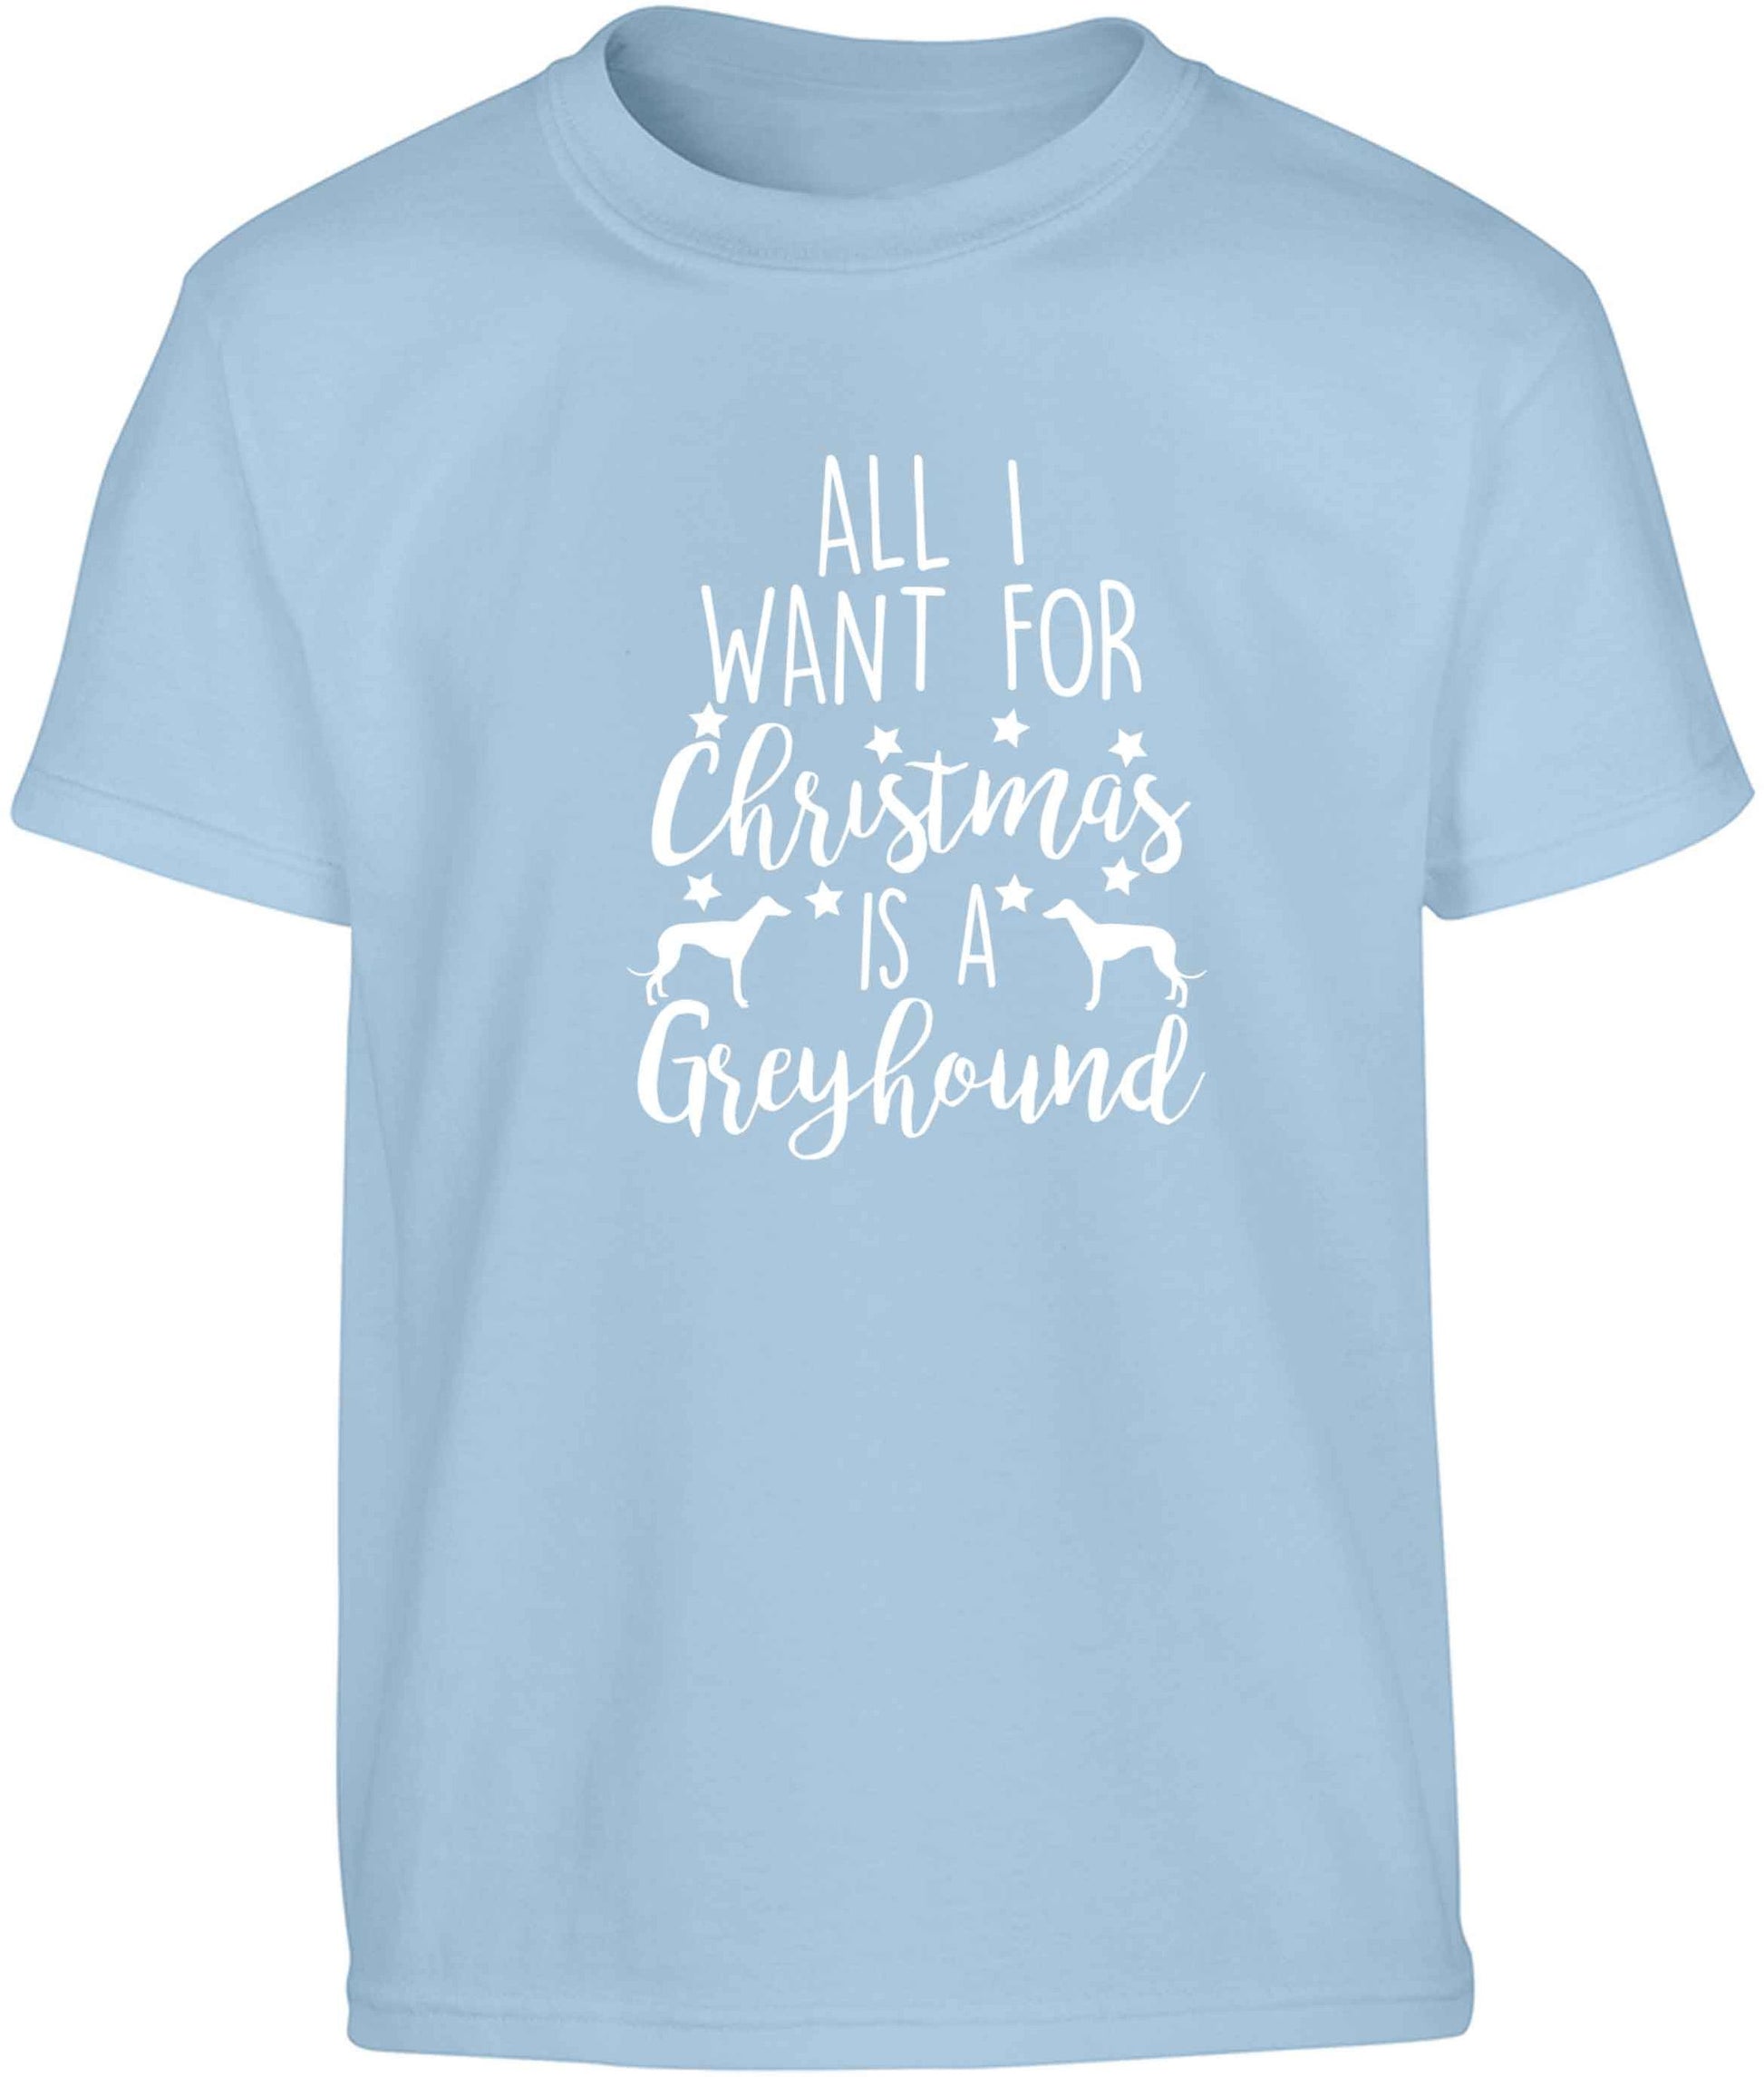 All I want for Christmas is a greyhound Children's light blue Tshirt 12-13 Years